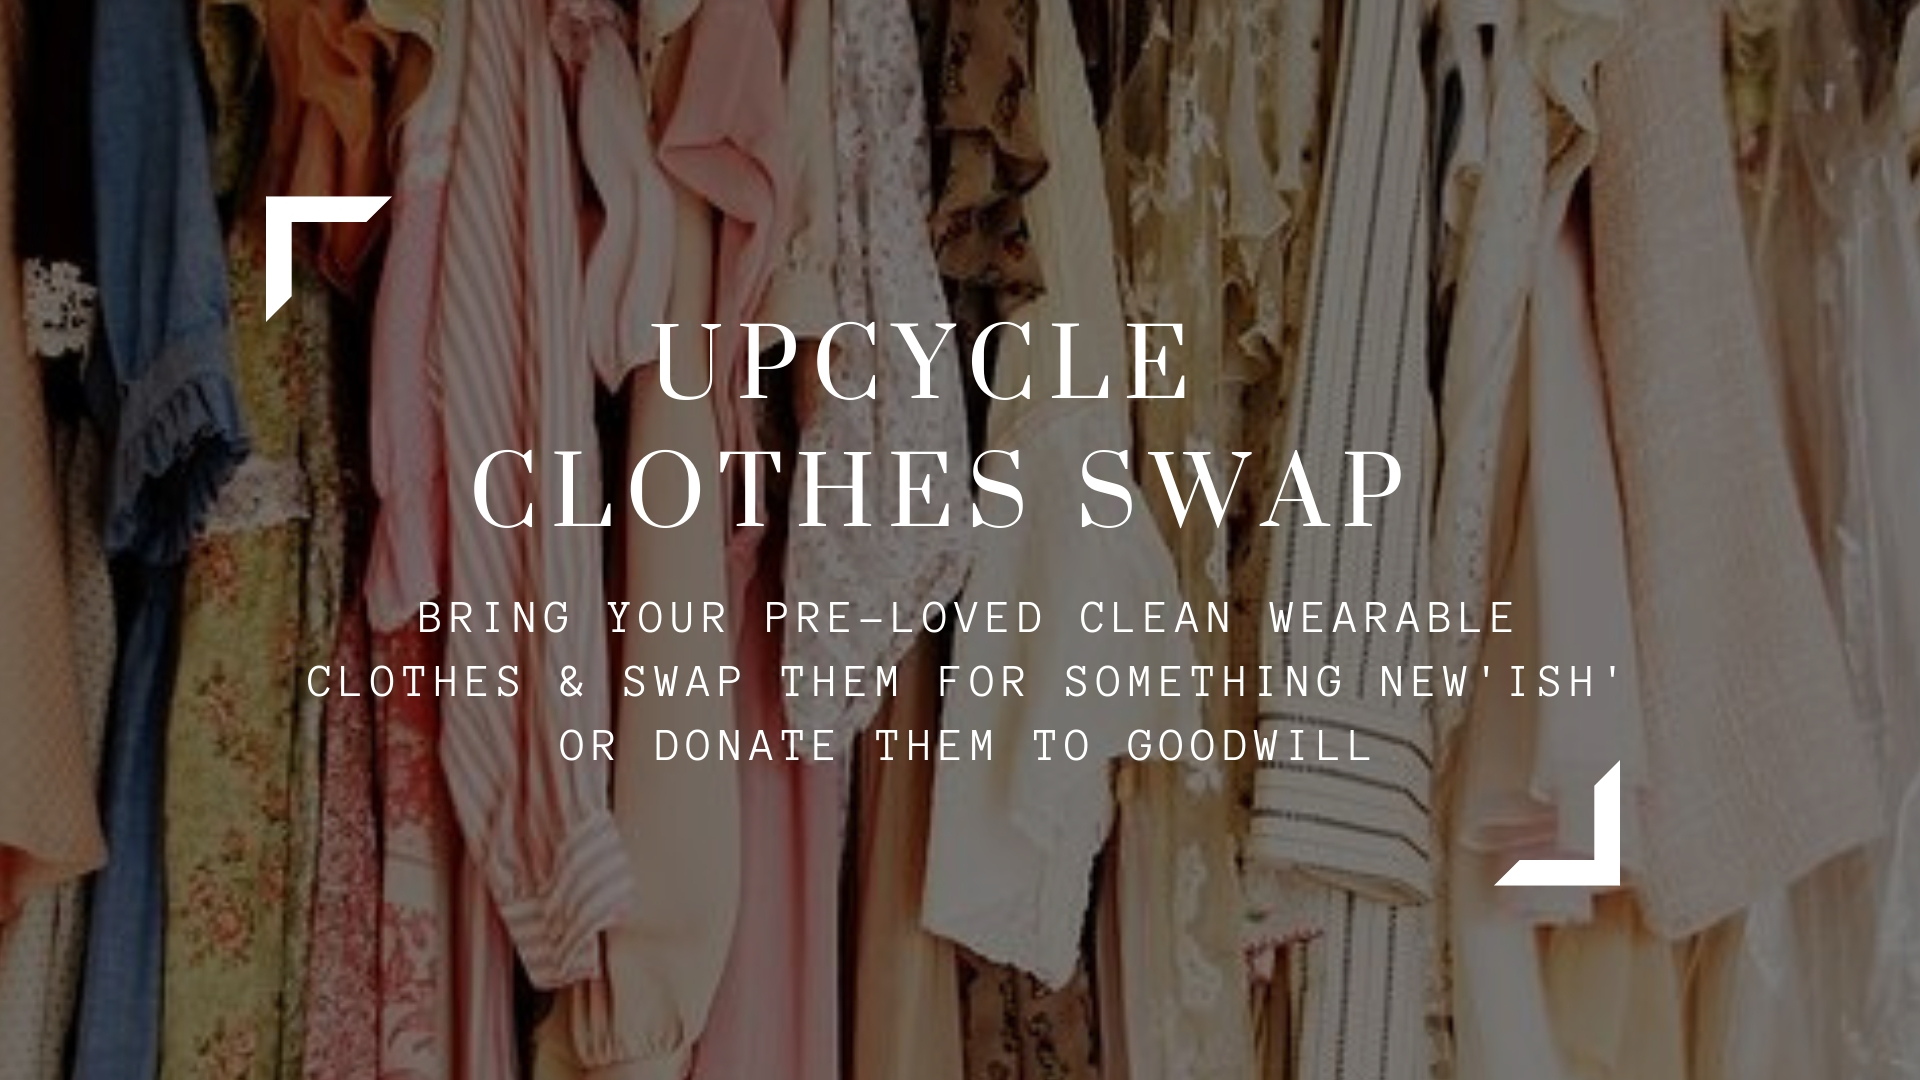 UPCYCLE CLOTHES SWAP.jpg